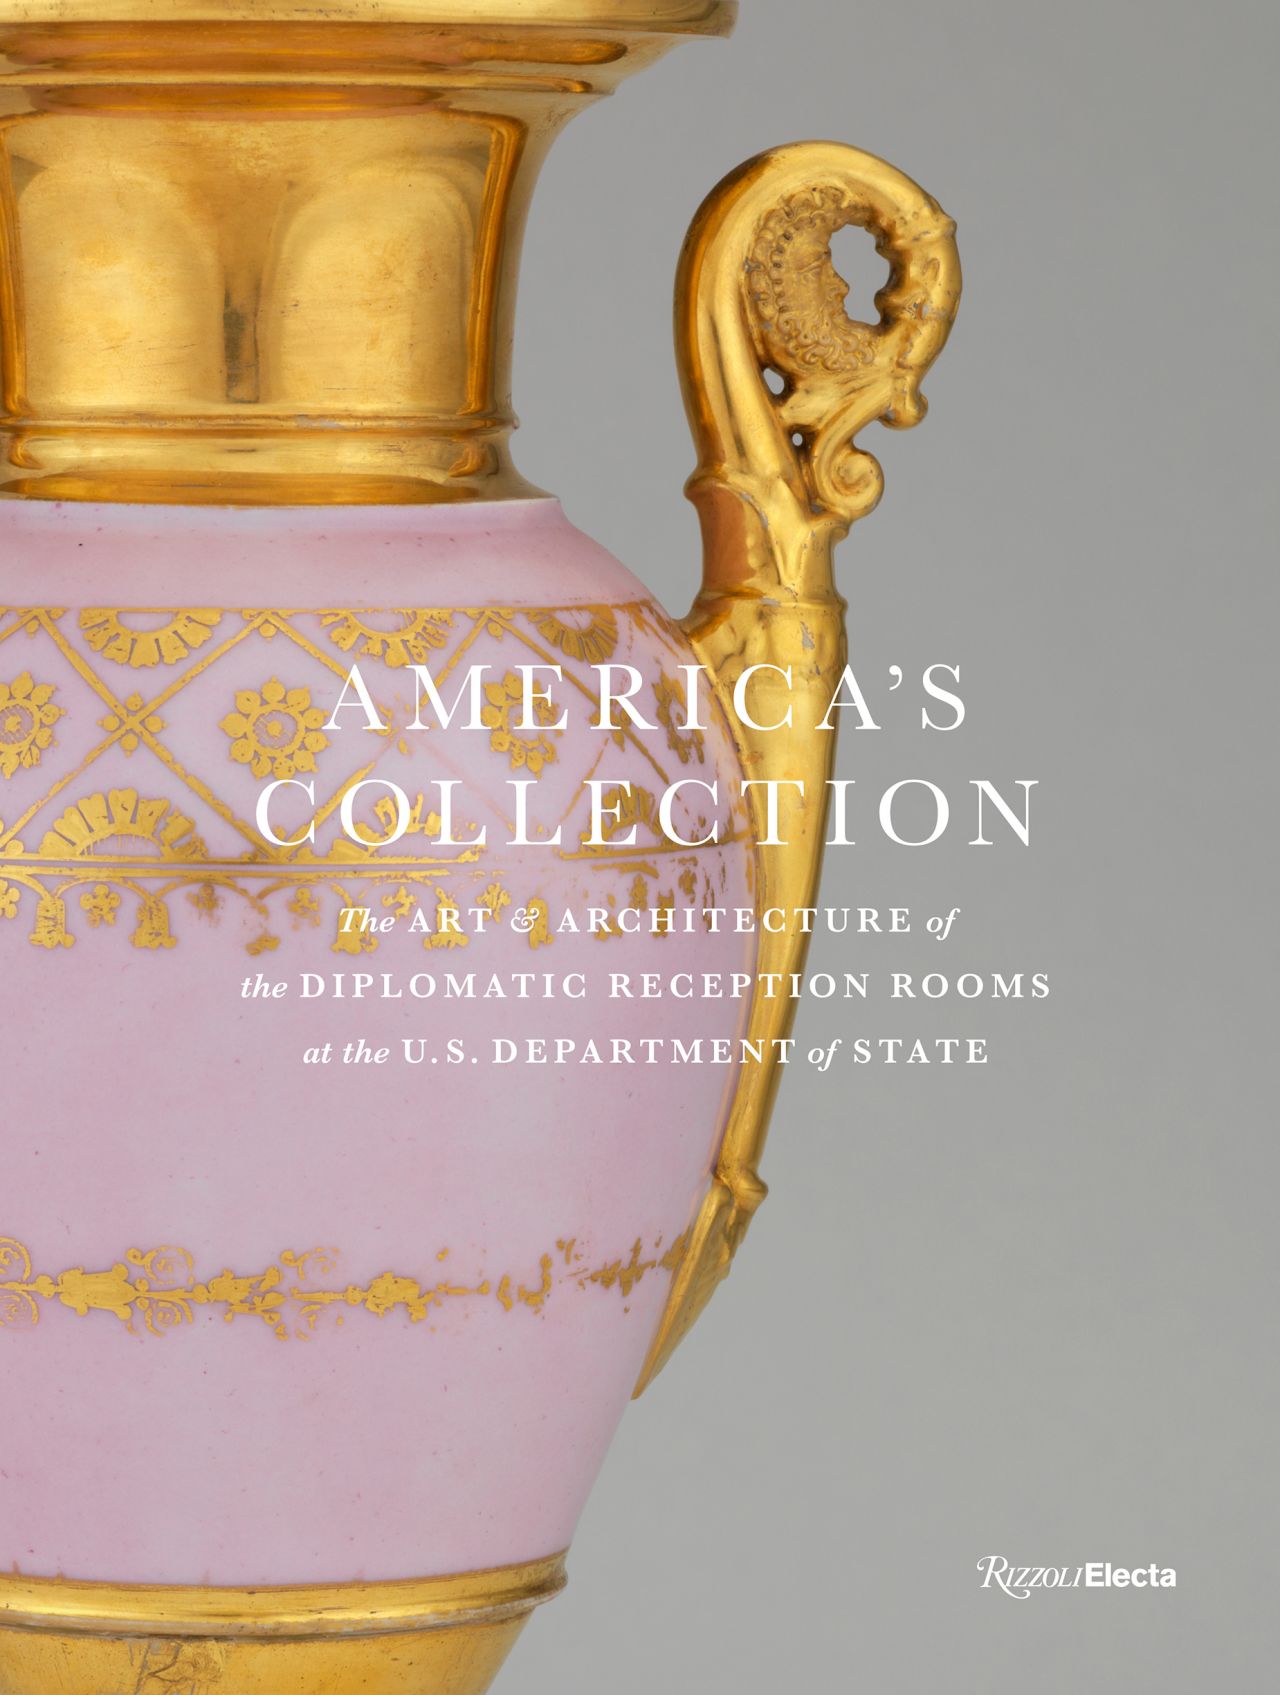 "America's Collection: The Art and Architecture of the Diplomatic Reception Rooms at the US Department of State."